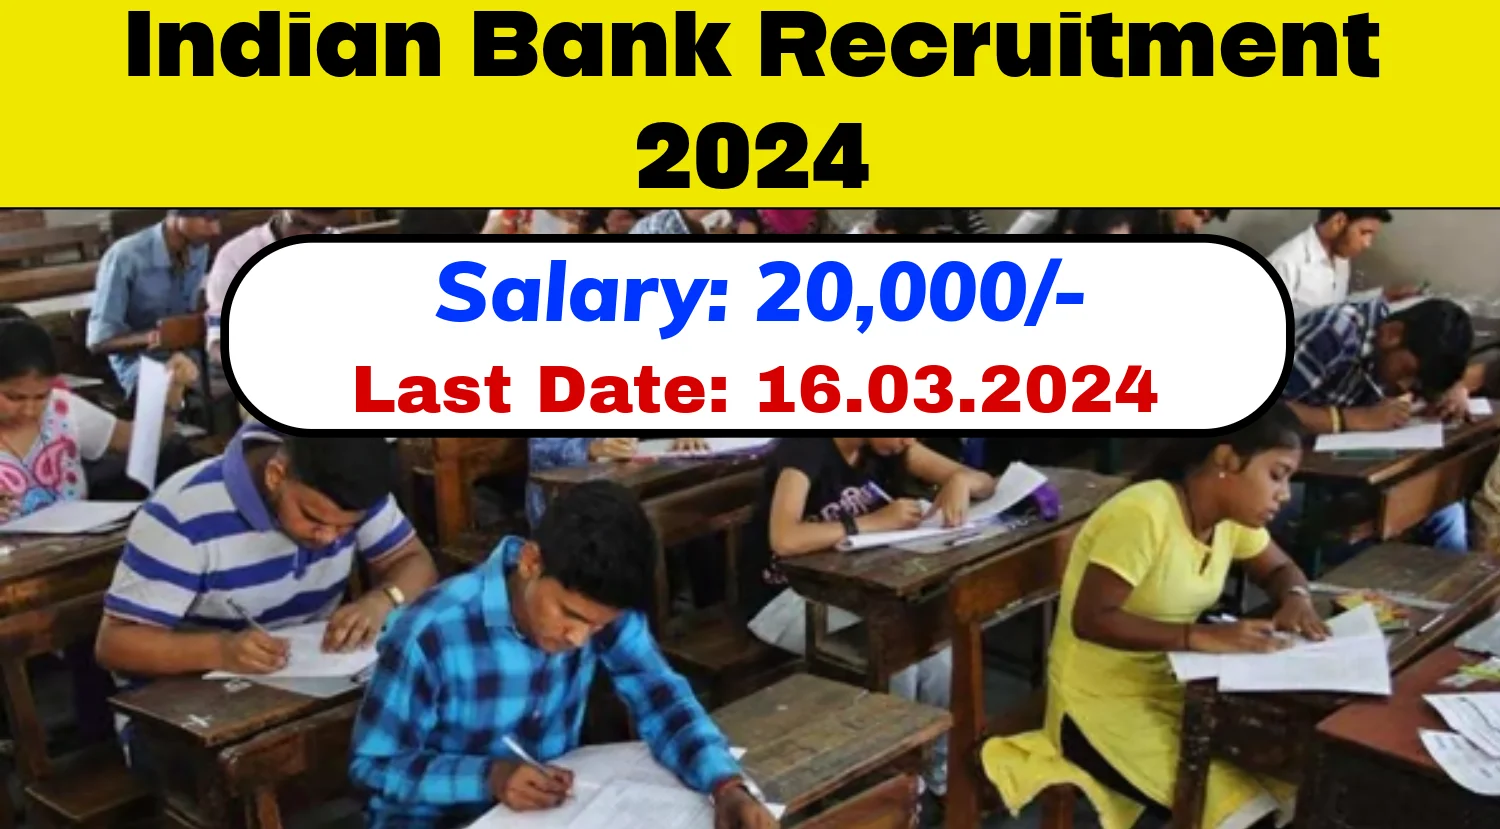 Indian Bank Recruitment 2024, Check Important Details